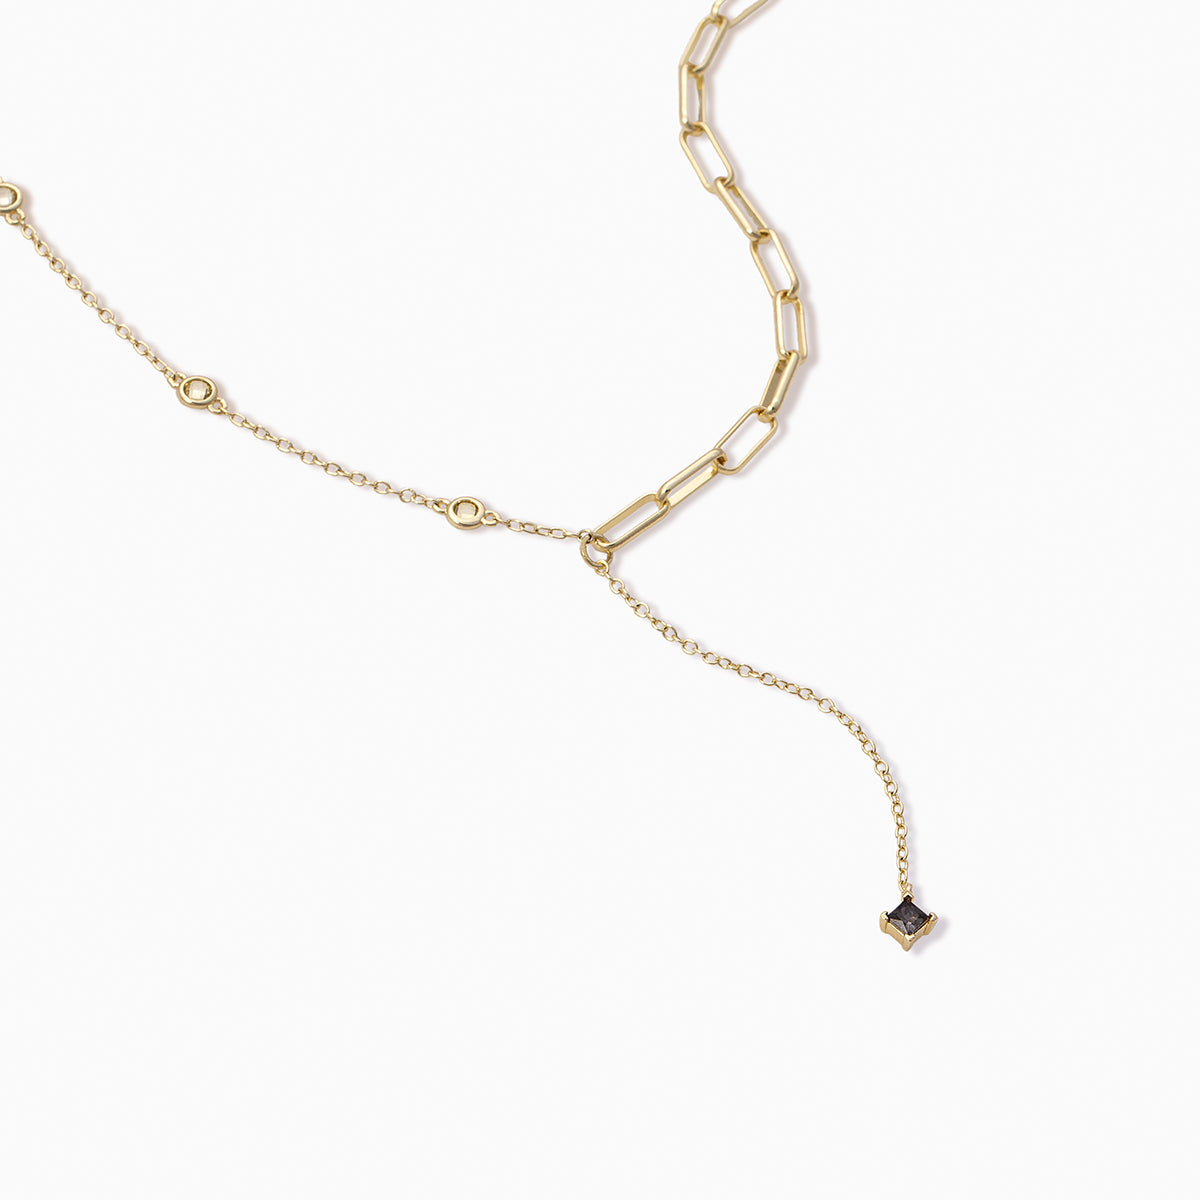 Undecided Necklace | Gold | Product Detail Image | Uncommon James